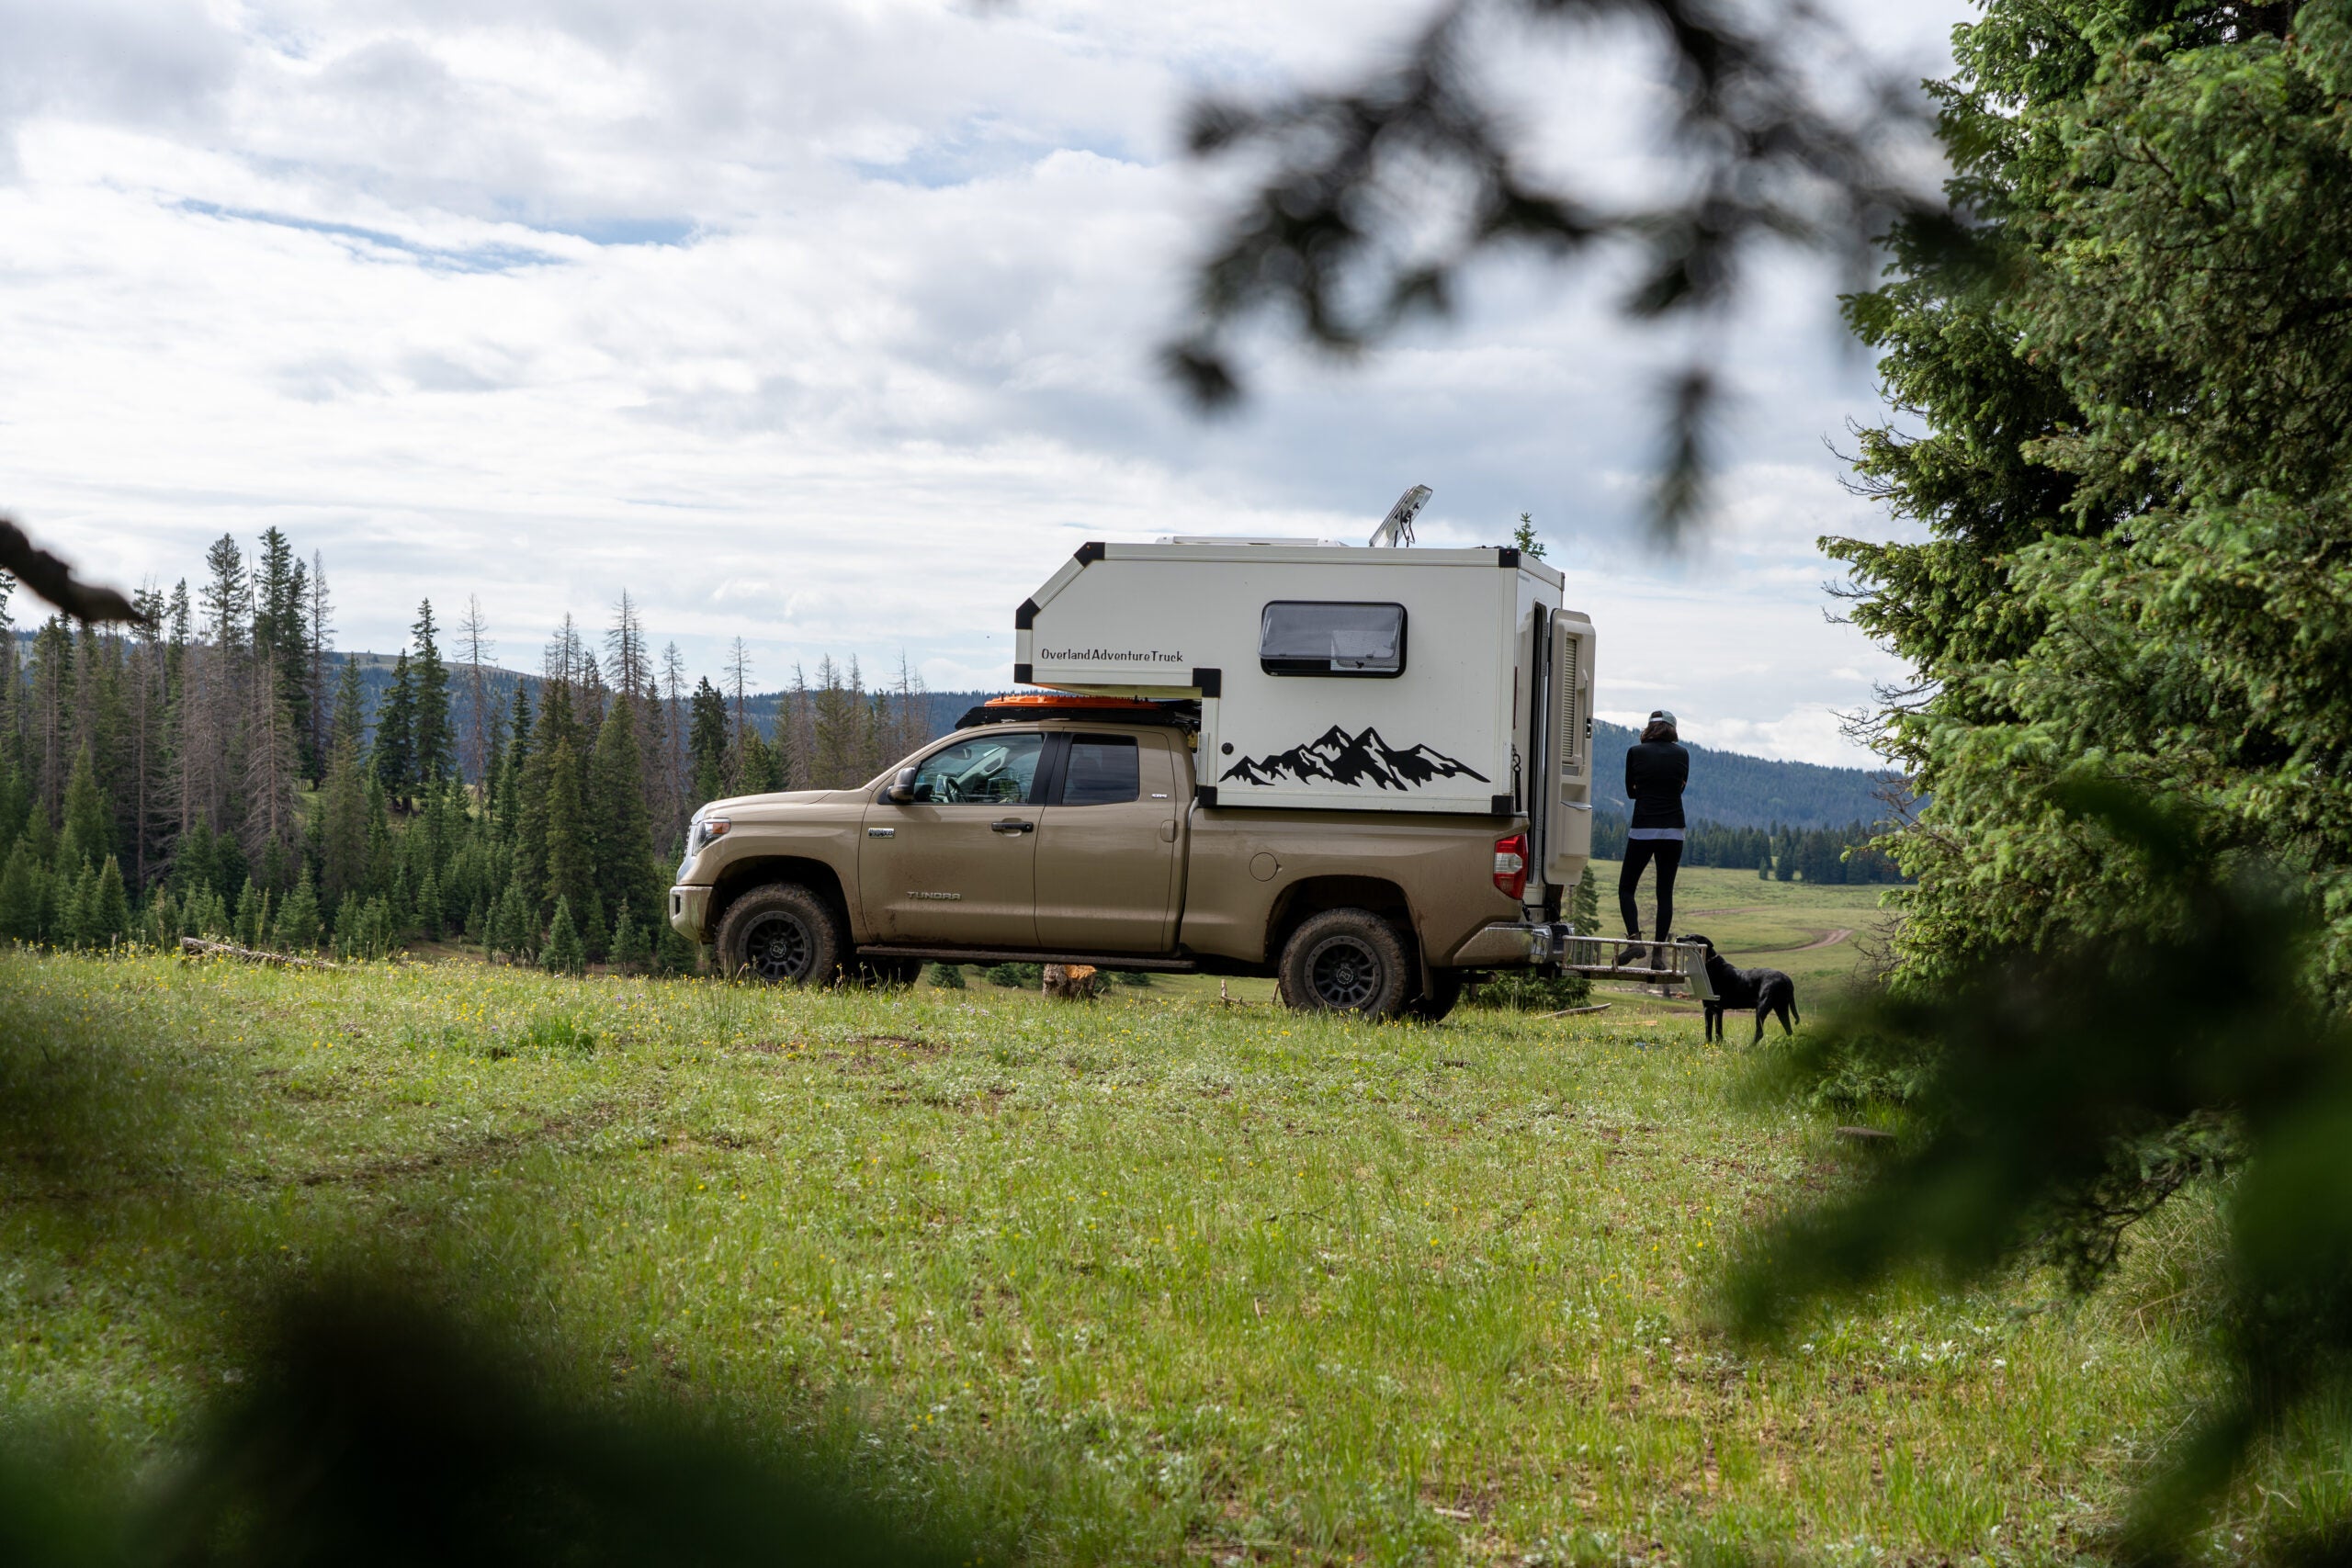 A pick-up truck set up for camping.